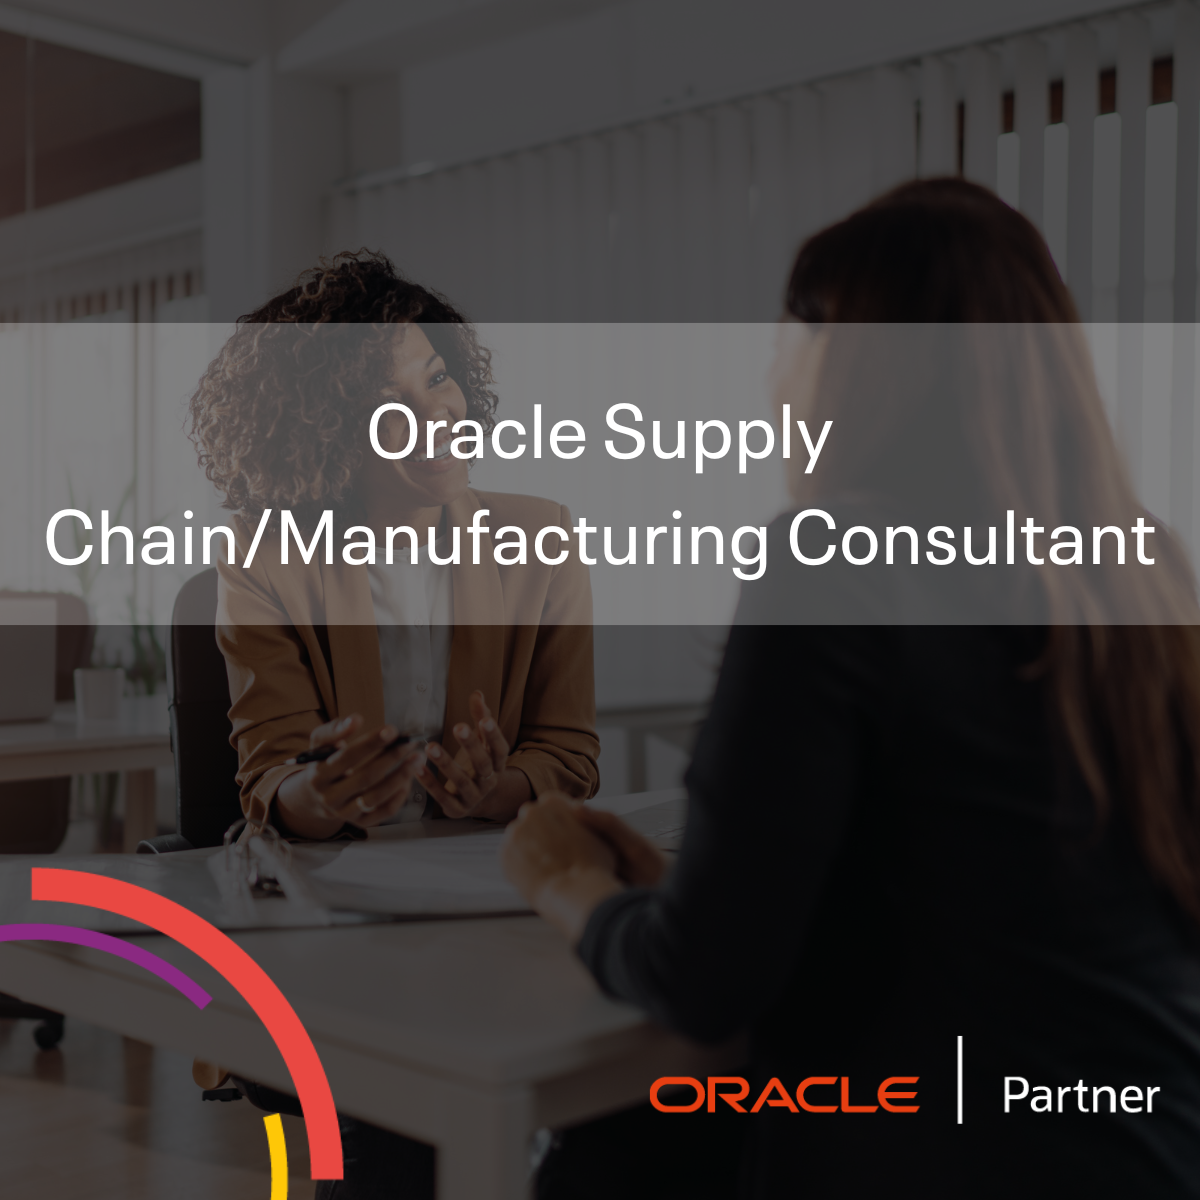 Oracle Supply ChainManufacturing Consultant